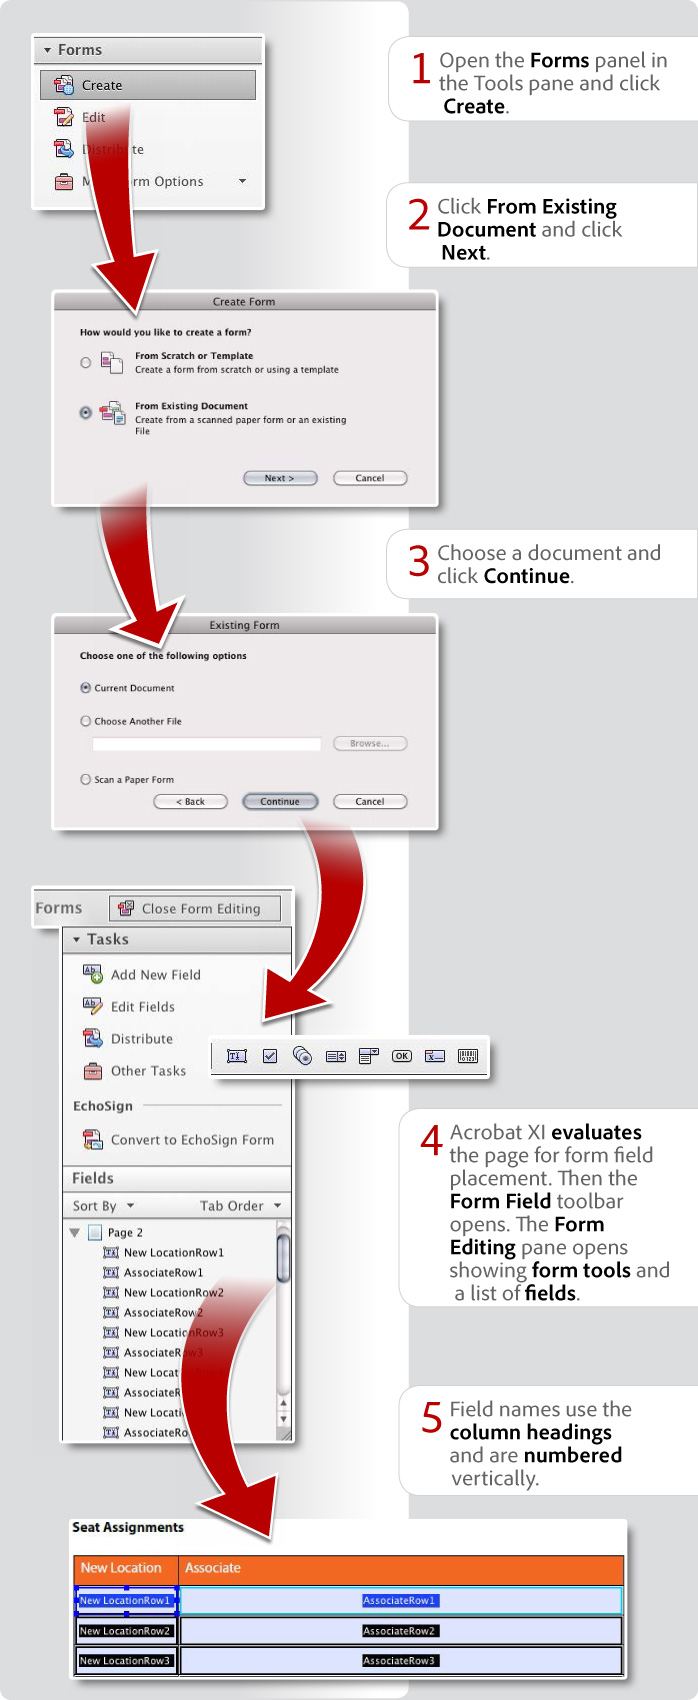 How to create a form from an existing document using Acrobat XI